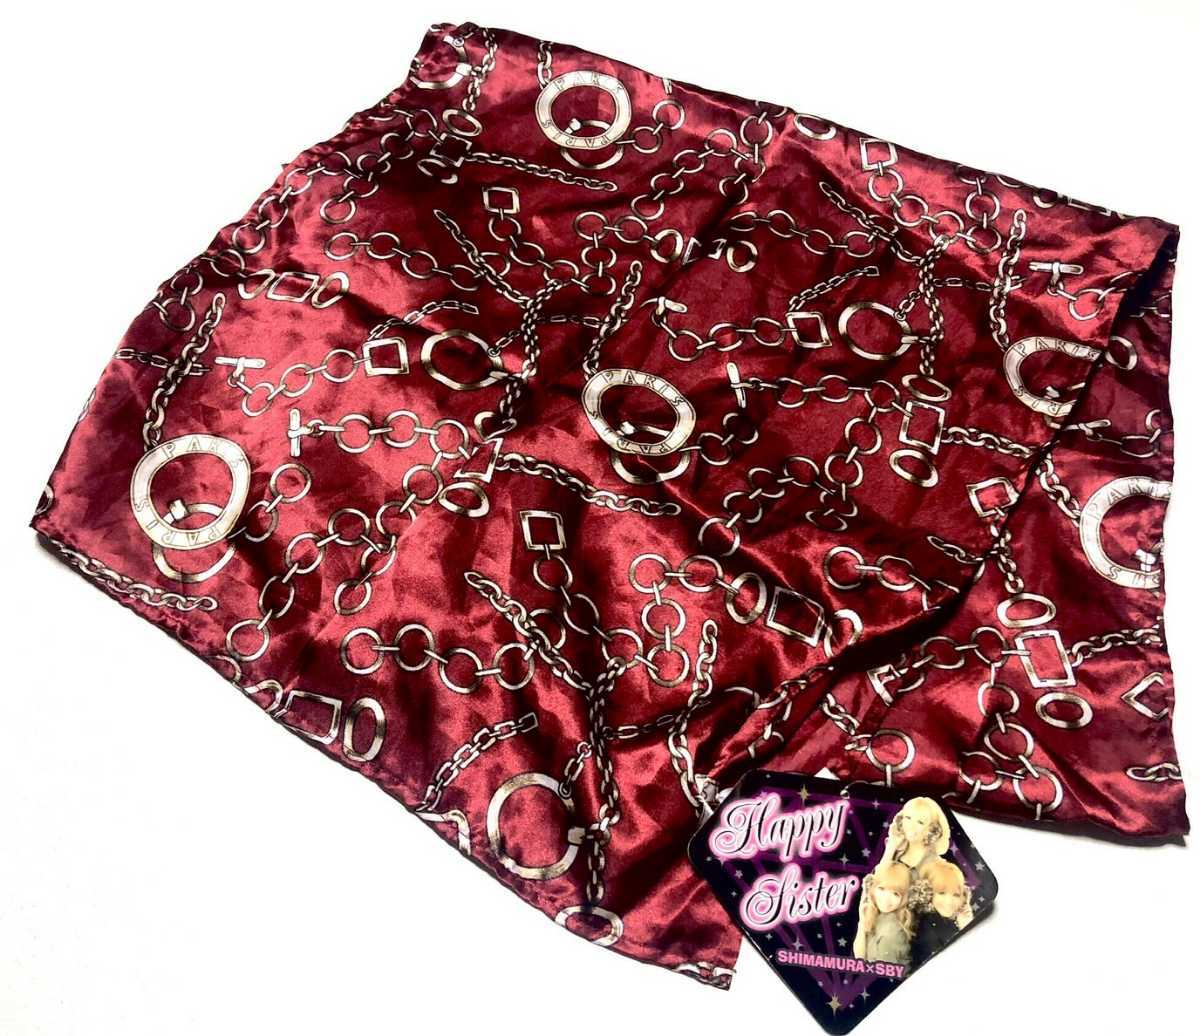  new goods chain pattern scarf SBY collaboration commodity red 165.x40.HAPPY SISTER rare stole also bandana rectangle stylish anonymity delivery free shipping 